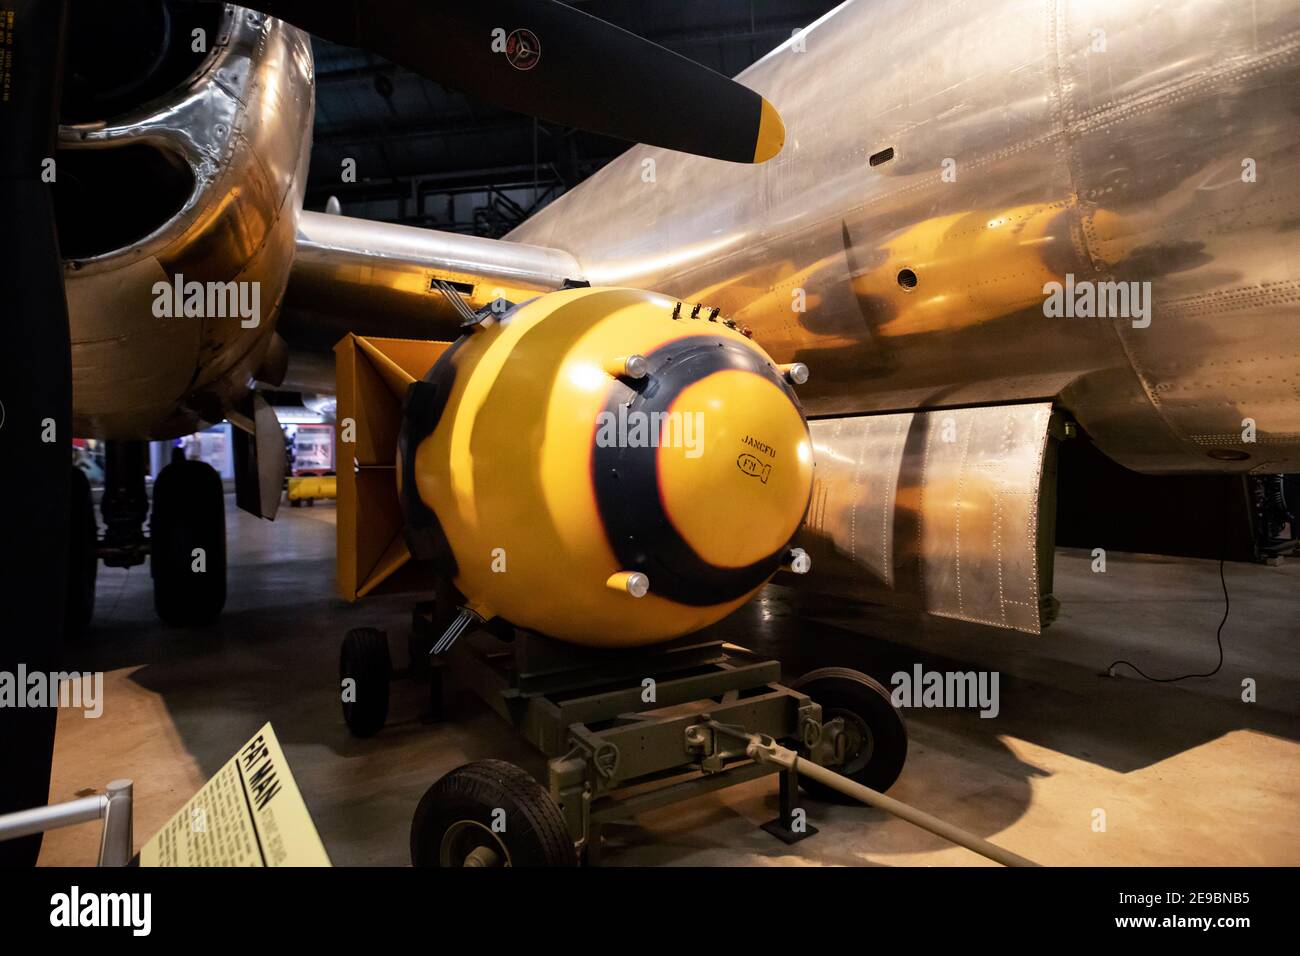 A replica of the Fat Man atomic (fission) bomb dropped on Nagasaki, Japan, on display at the National Museum of the US Air Force in Dayton, Ohio, USA. Stock Photo